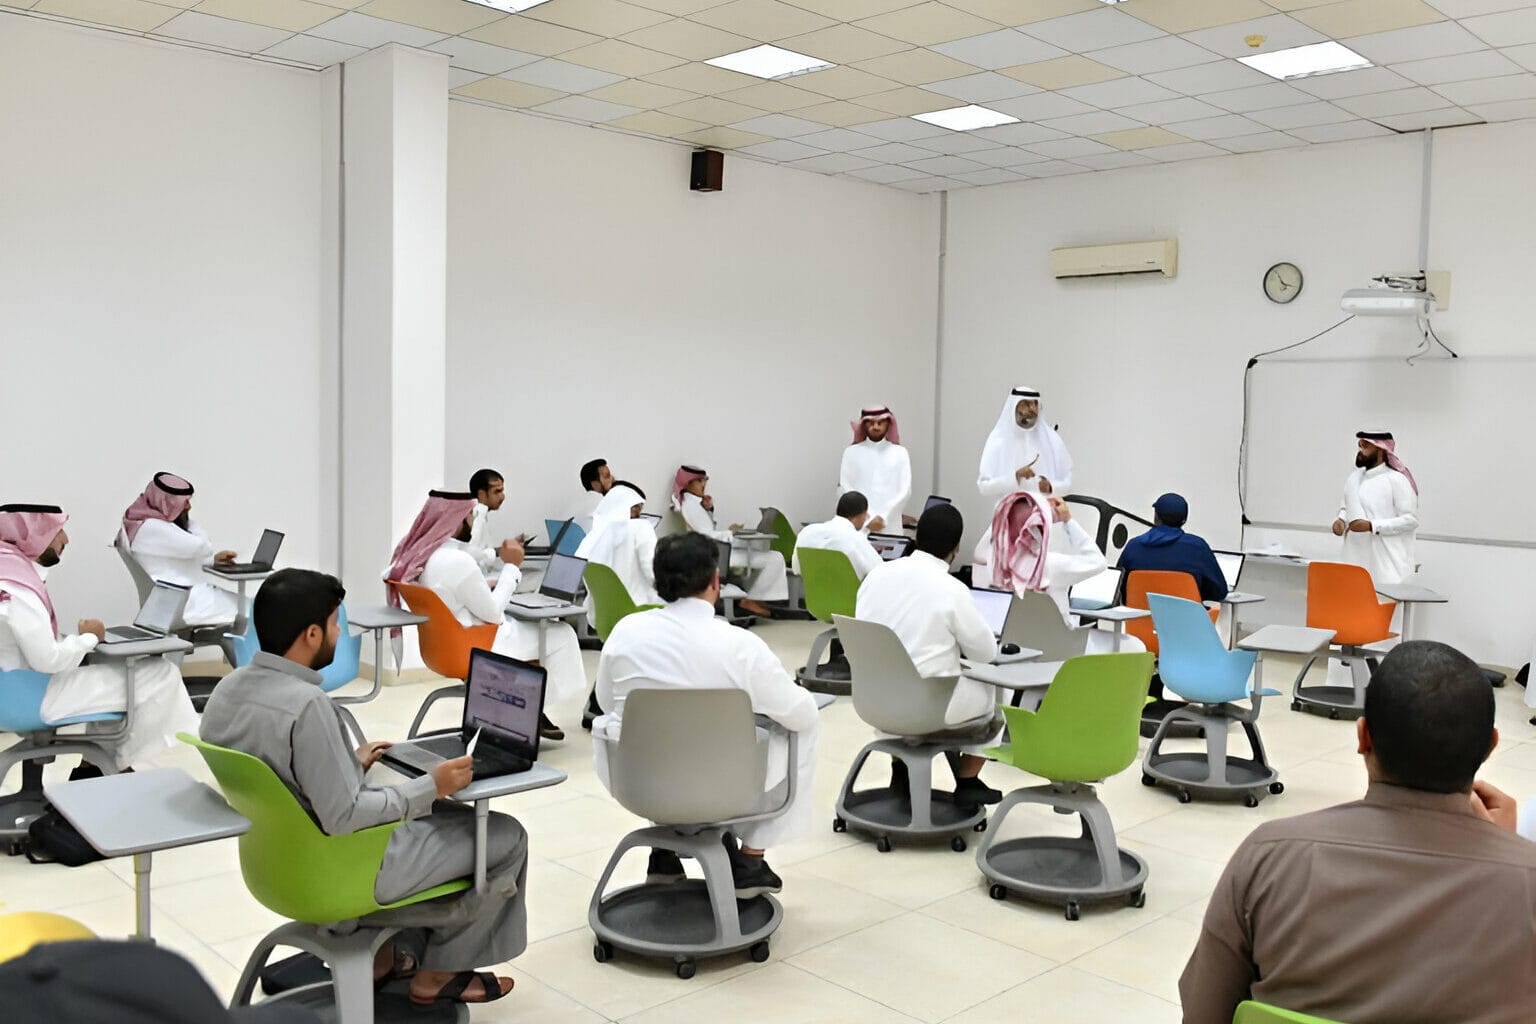 Saudi Electronic University launches Digital transformation in partnership with GamaLearn